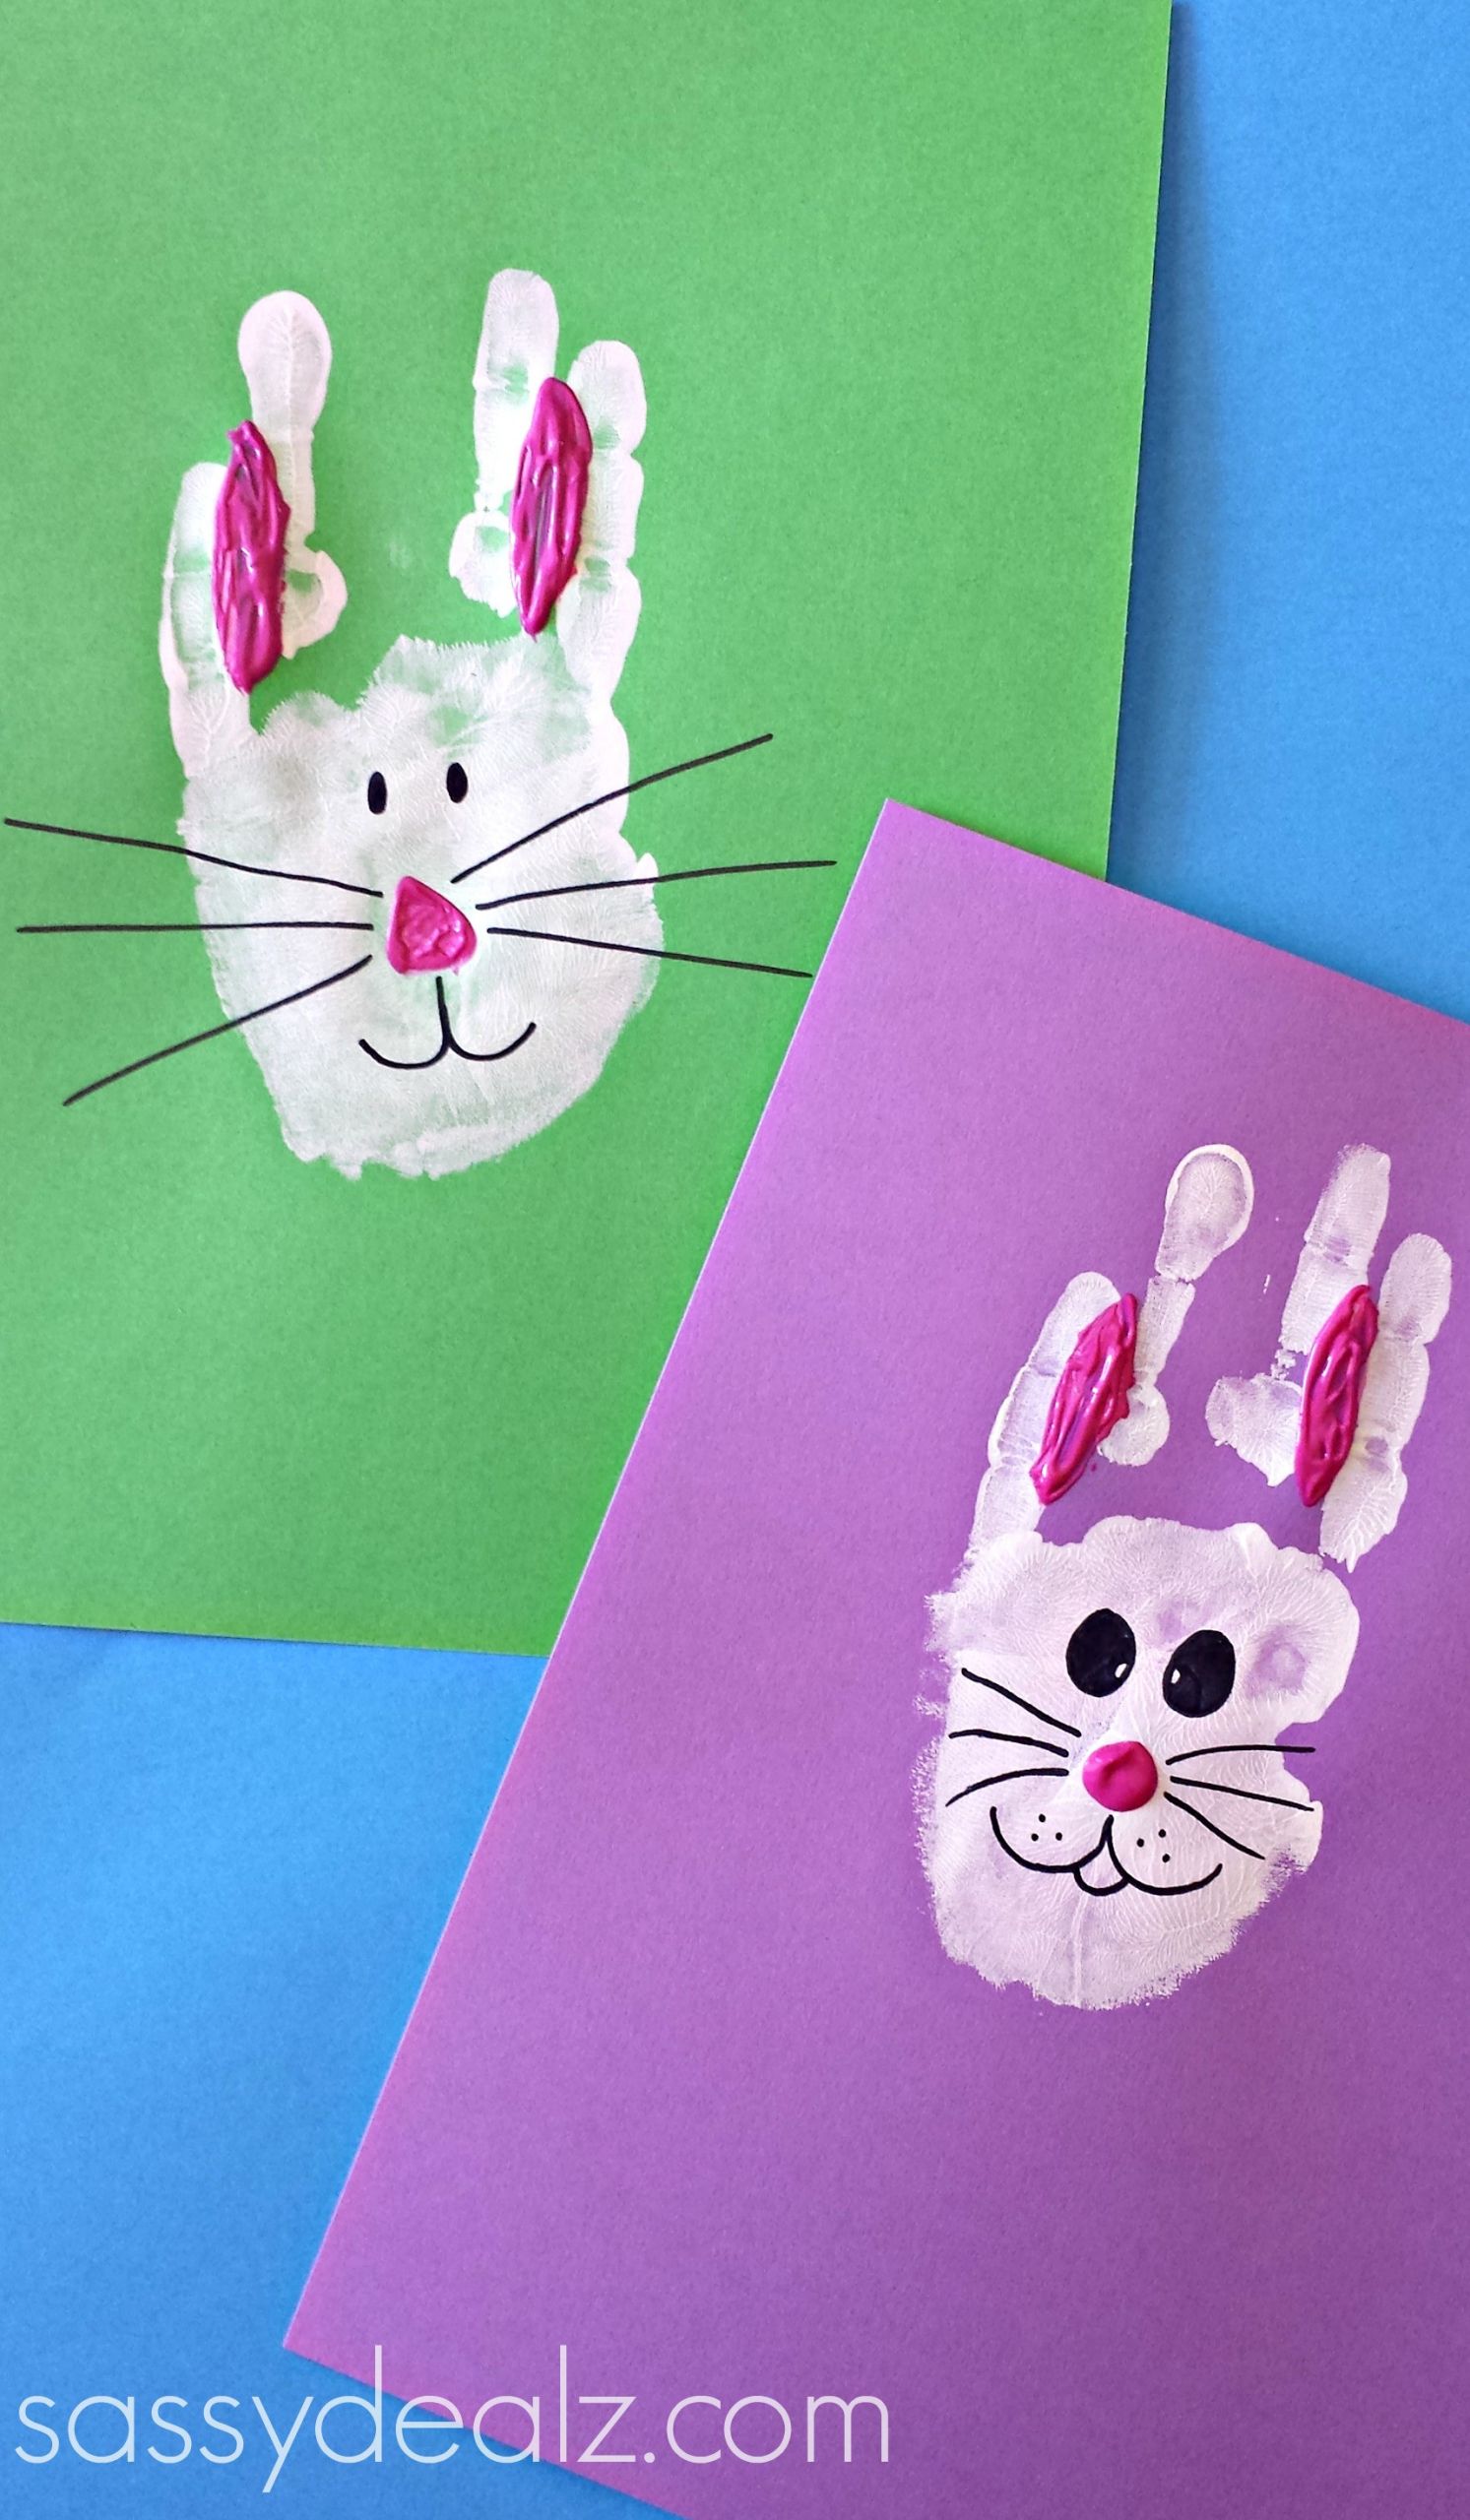 Easter Craft Ideas For Toddlers
 Bunny Rabbit Handprint Craft For Kids Easter Idea